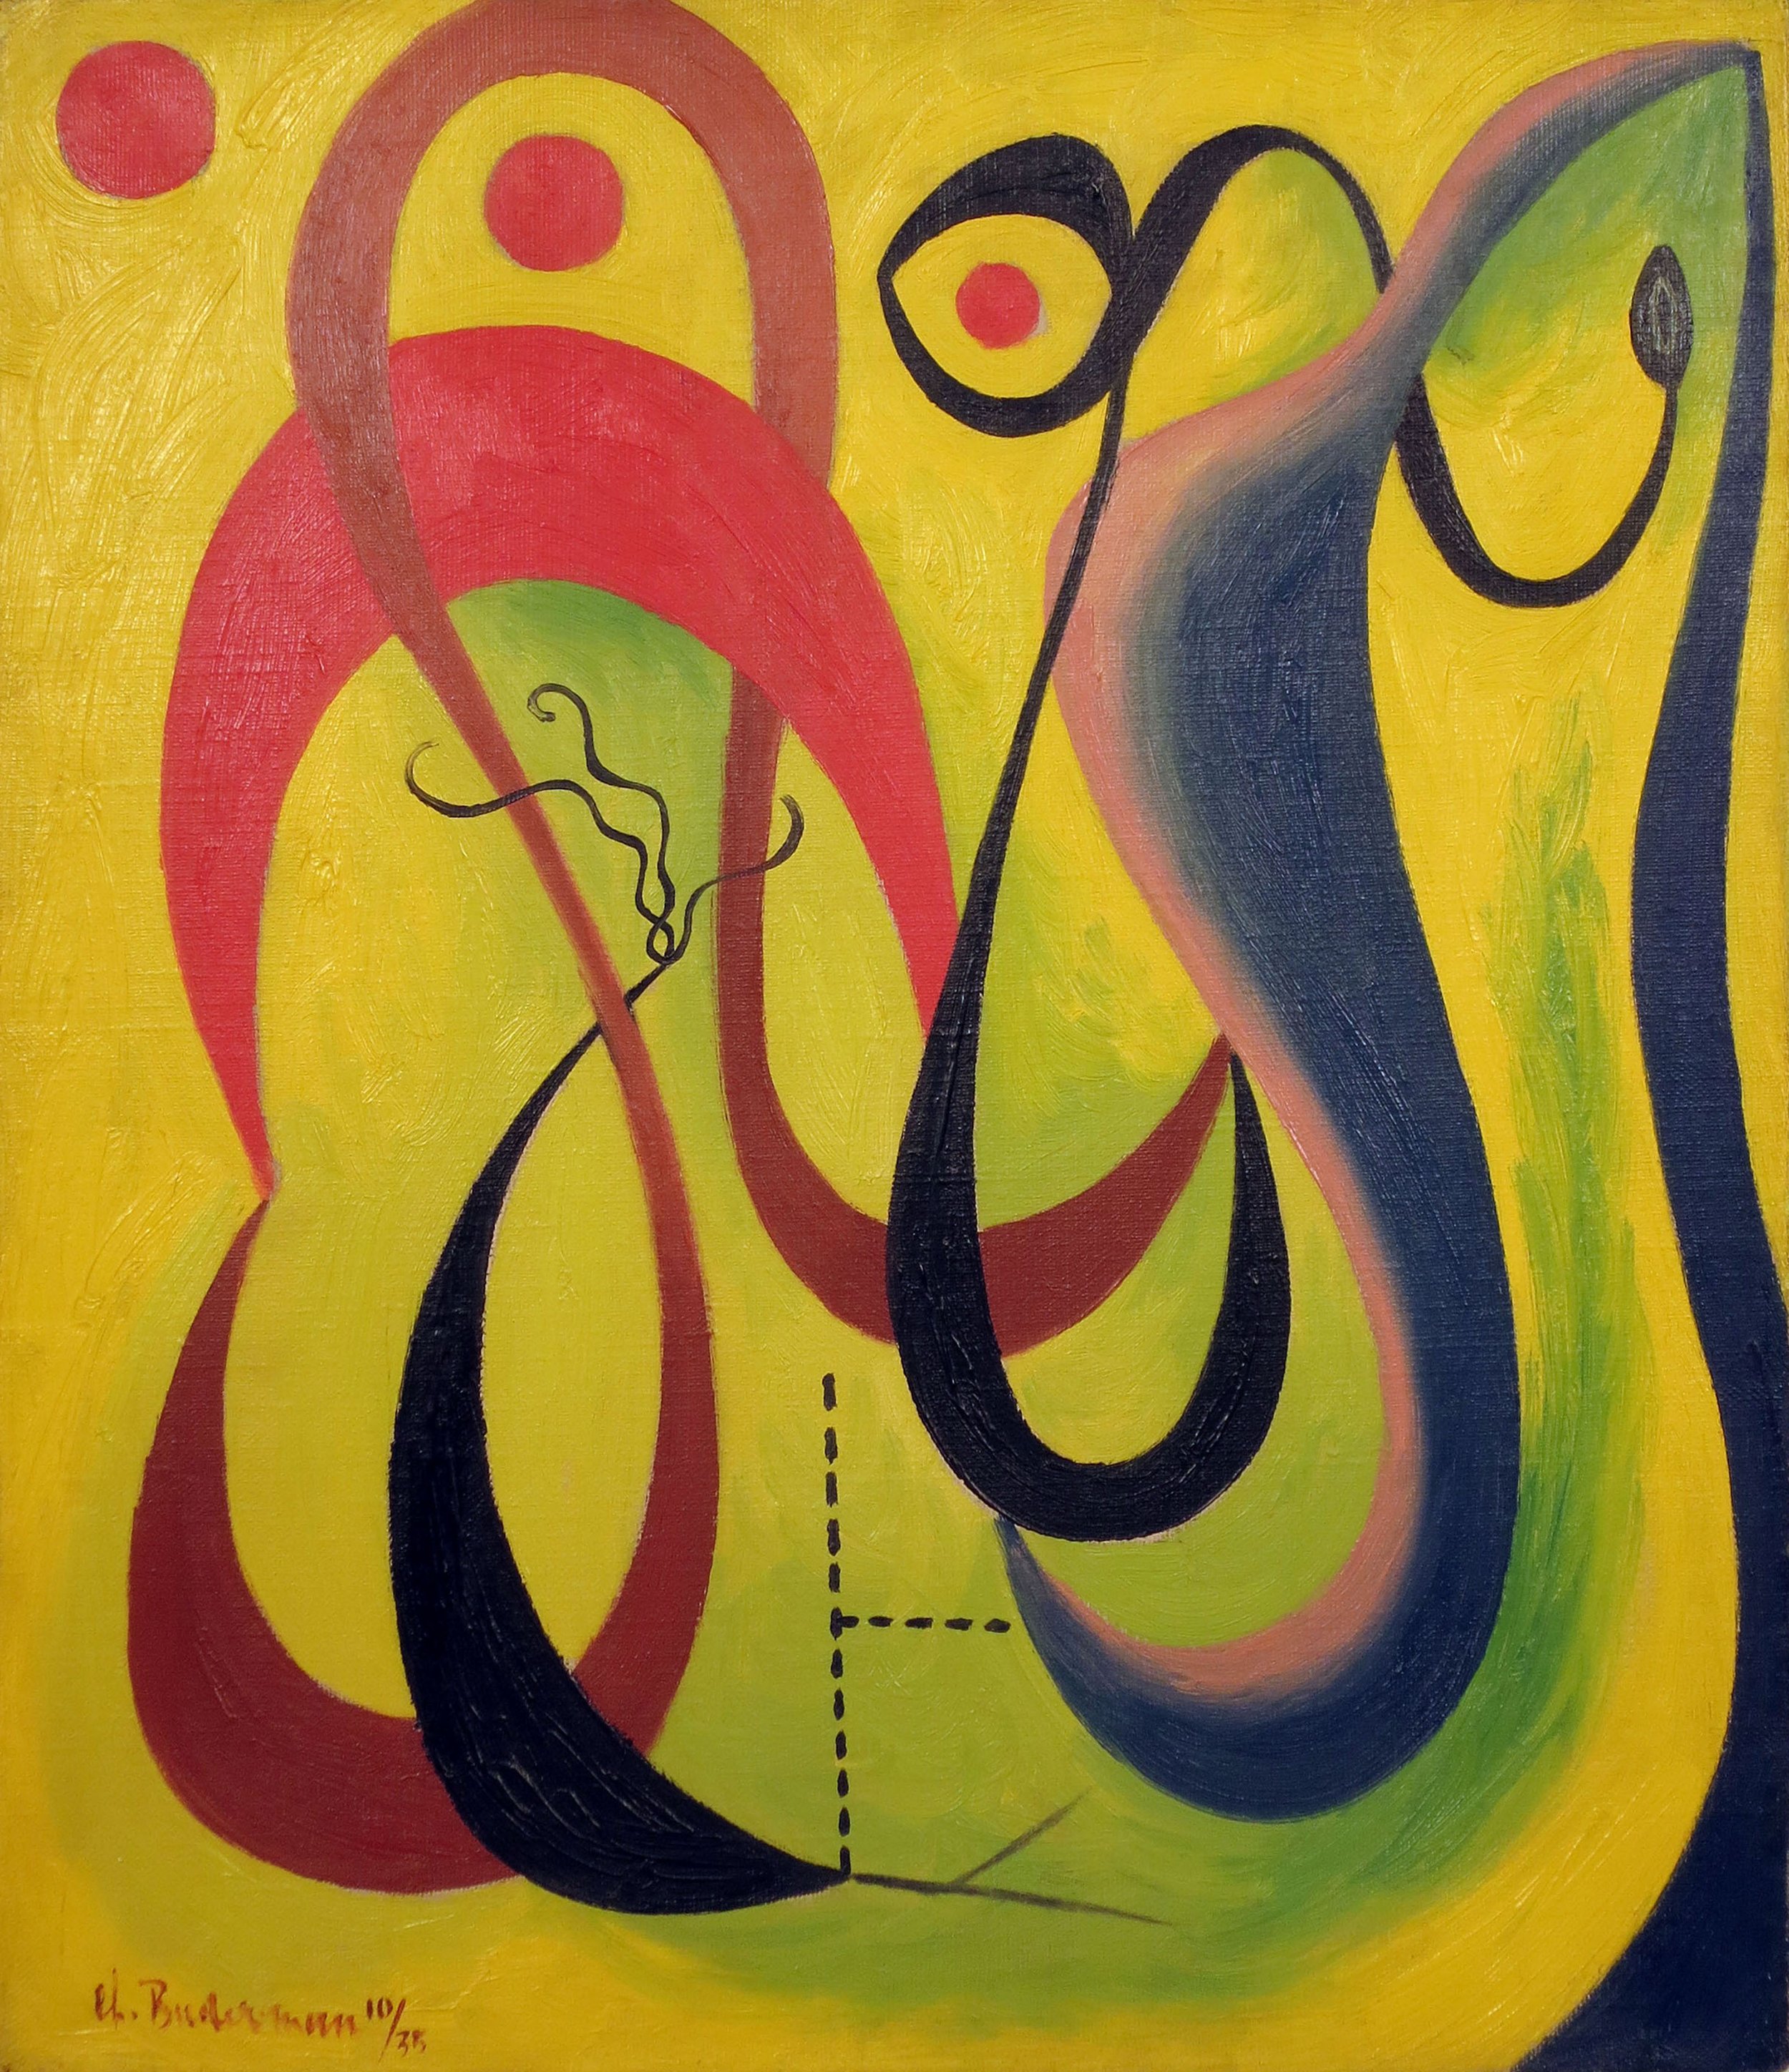 Abstract painting of black, red, and blue serpentine forms with dots and dashes on a yellow and green background.